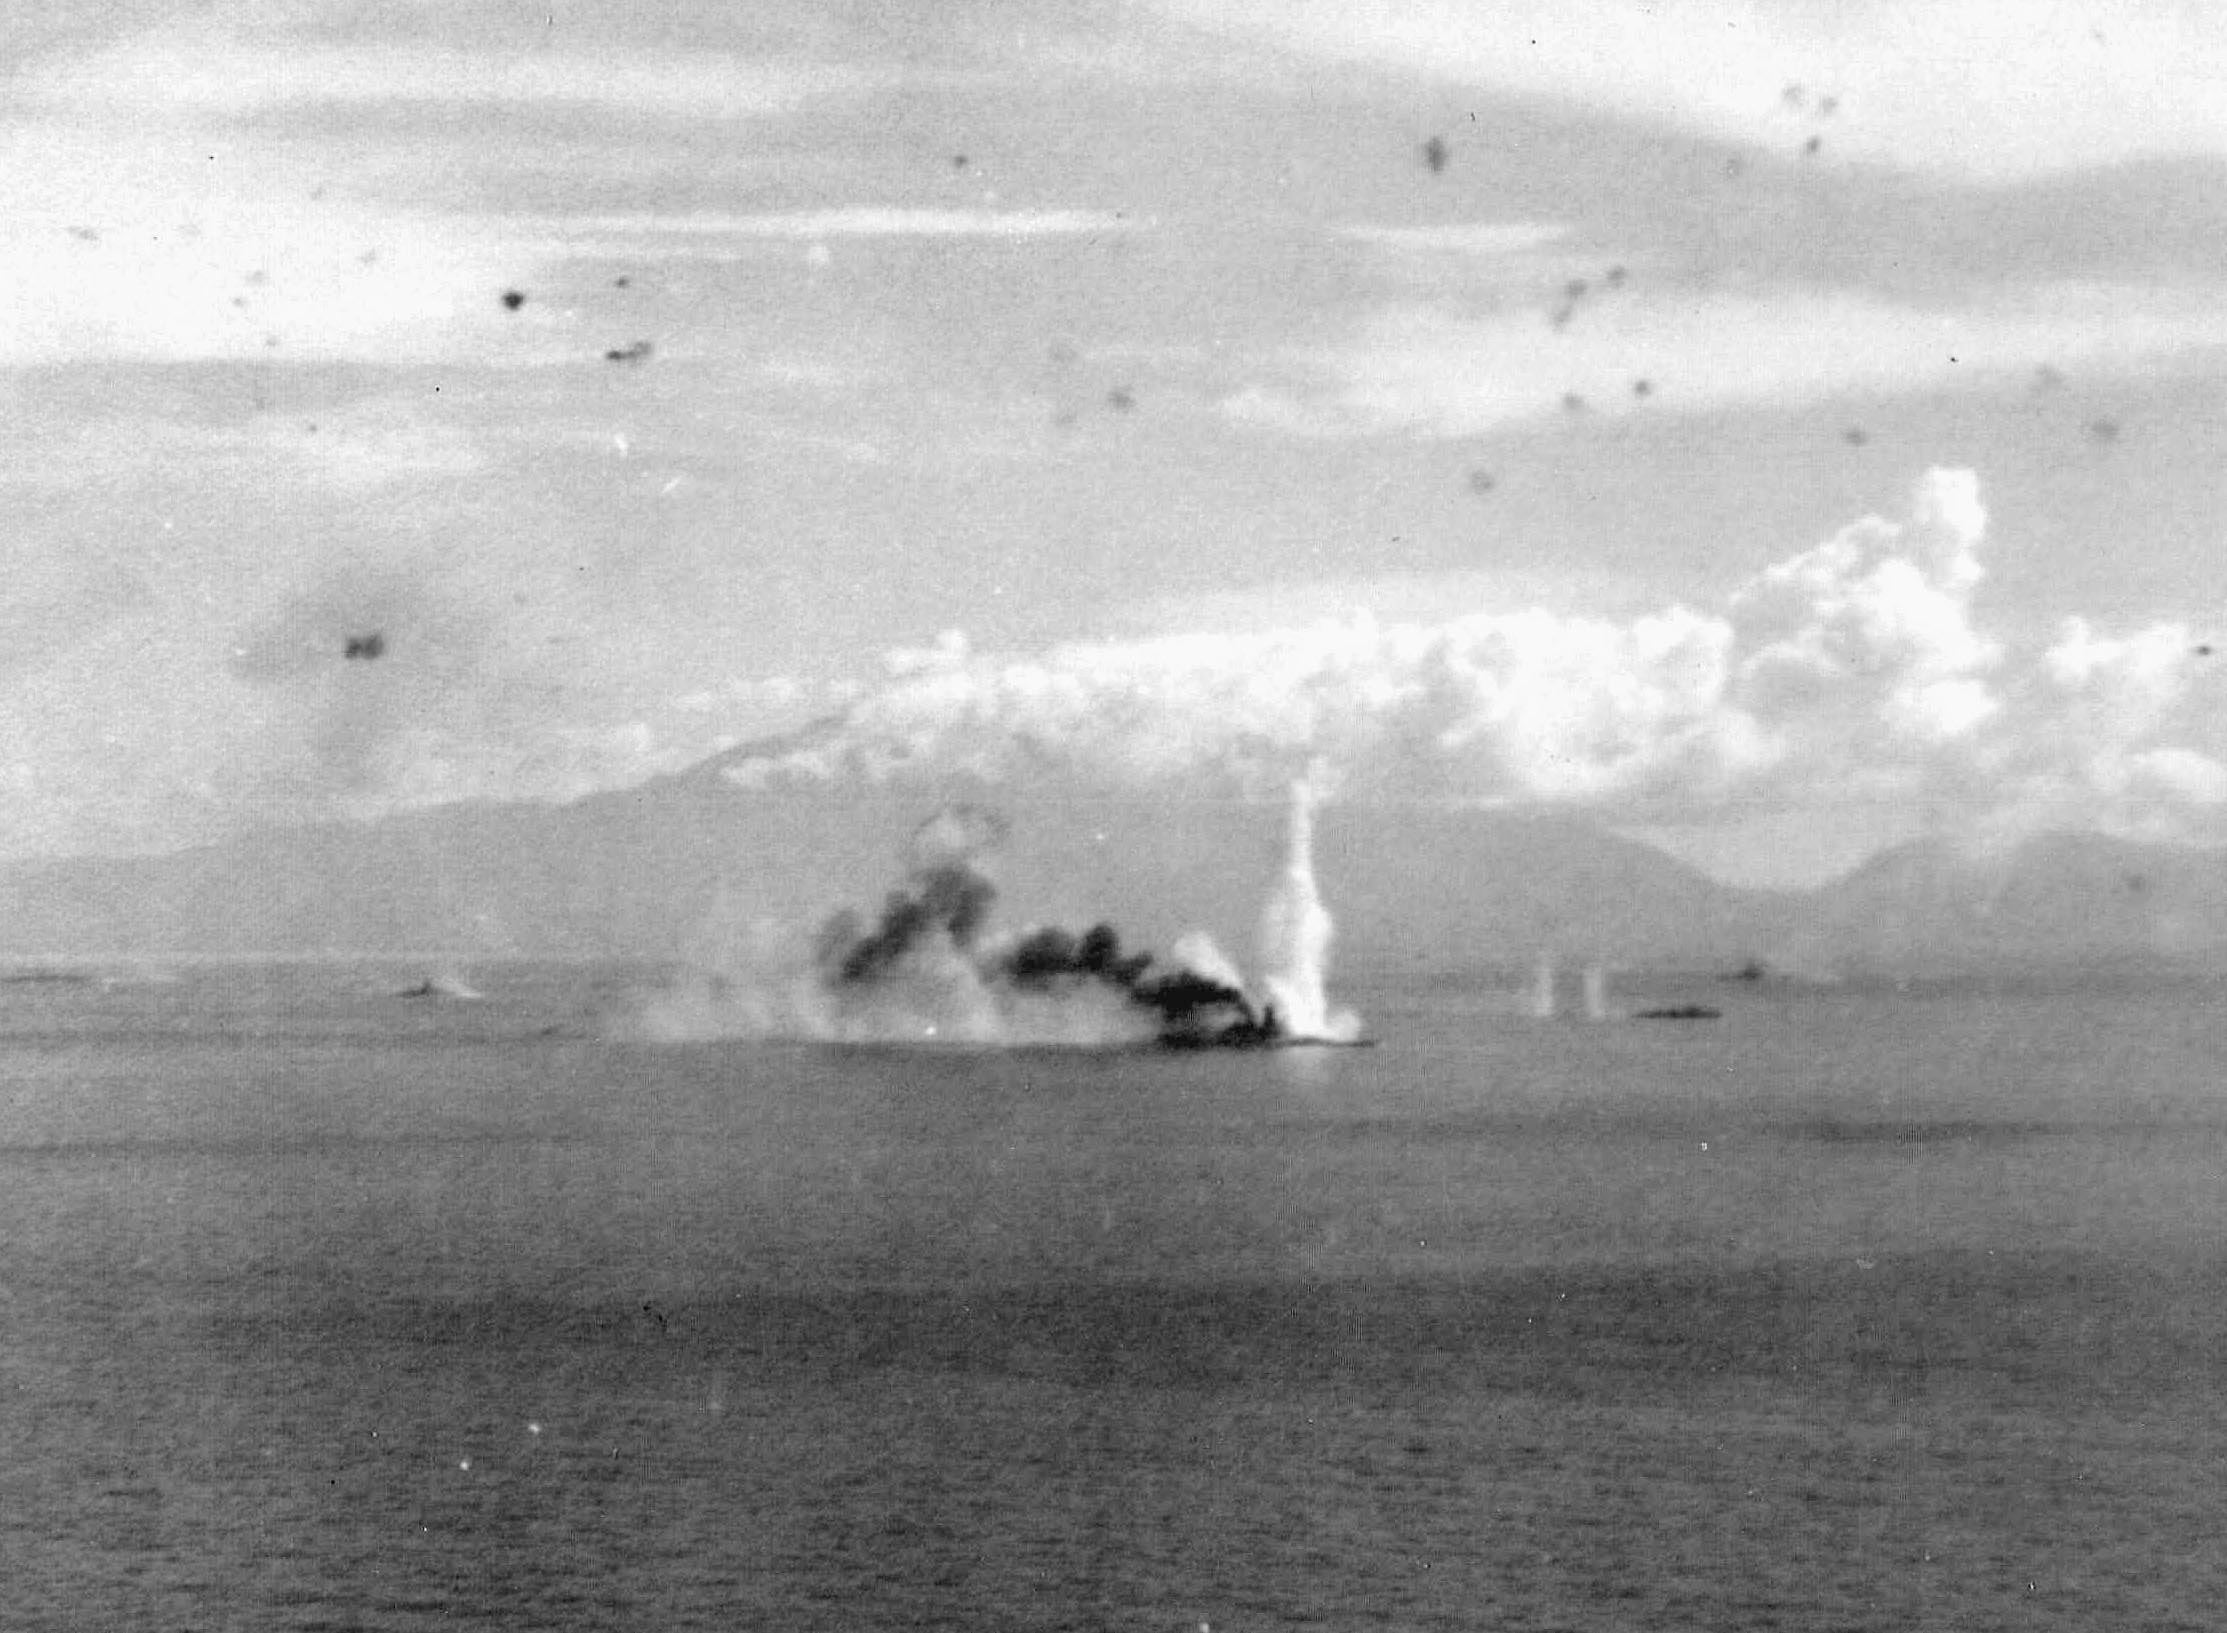 The huge Japanese battleship Musashi, part of the Center Force, was attacked by U.S. fliers in daylight of the 24th in the Sibuyan Sea.